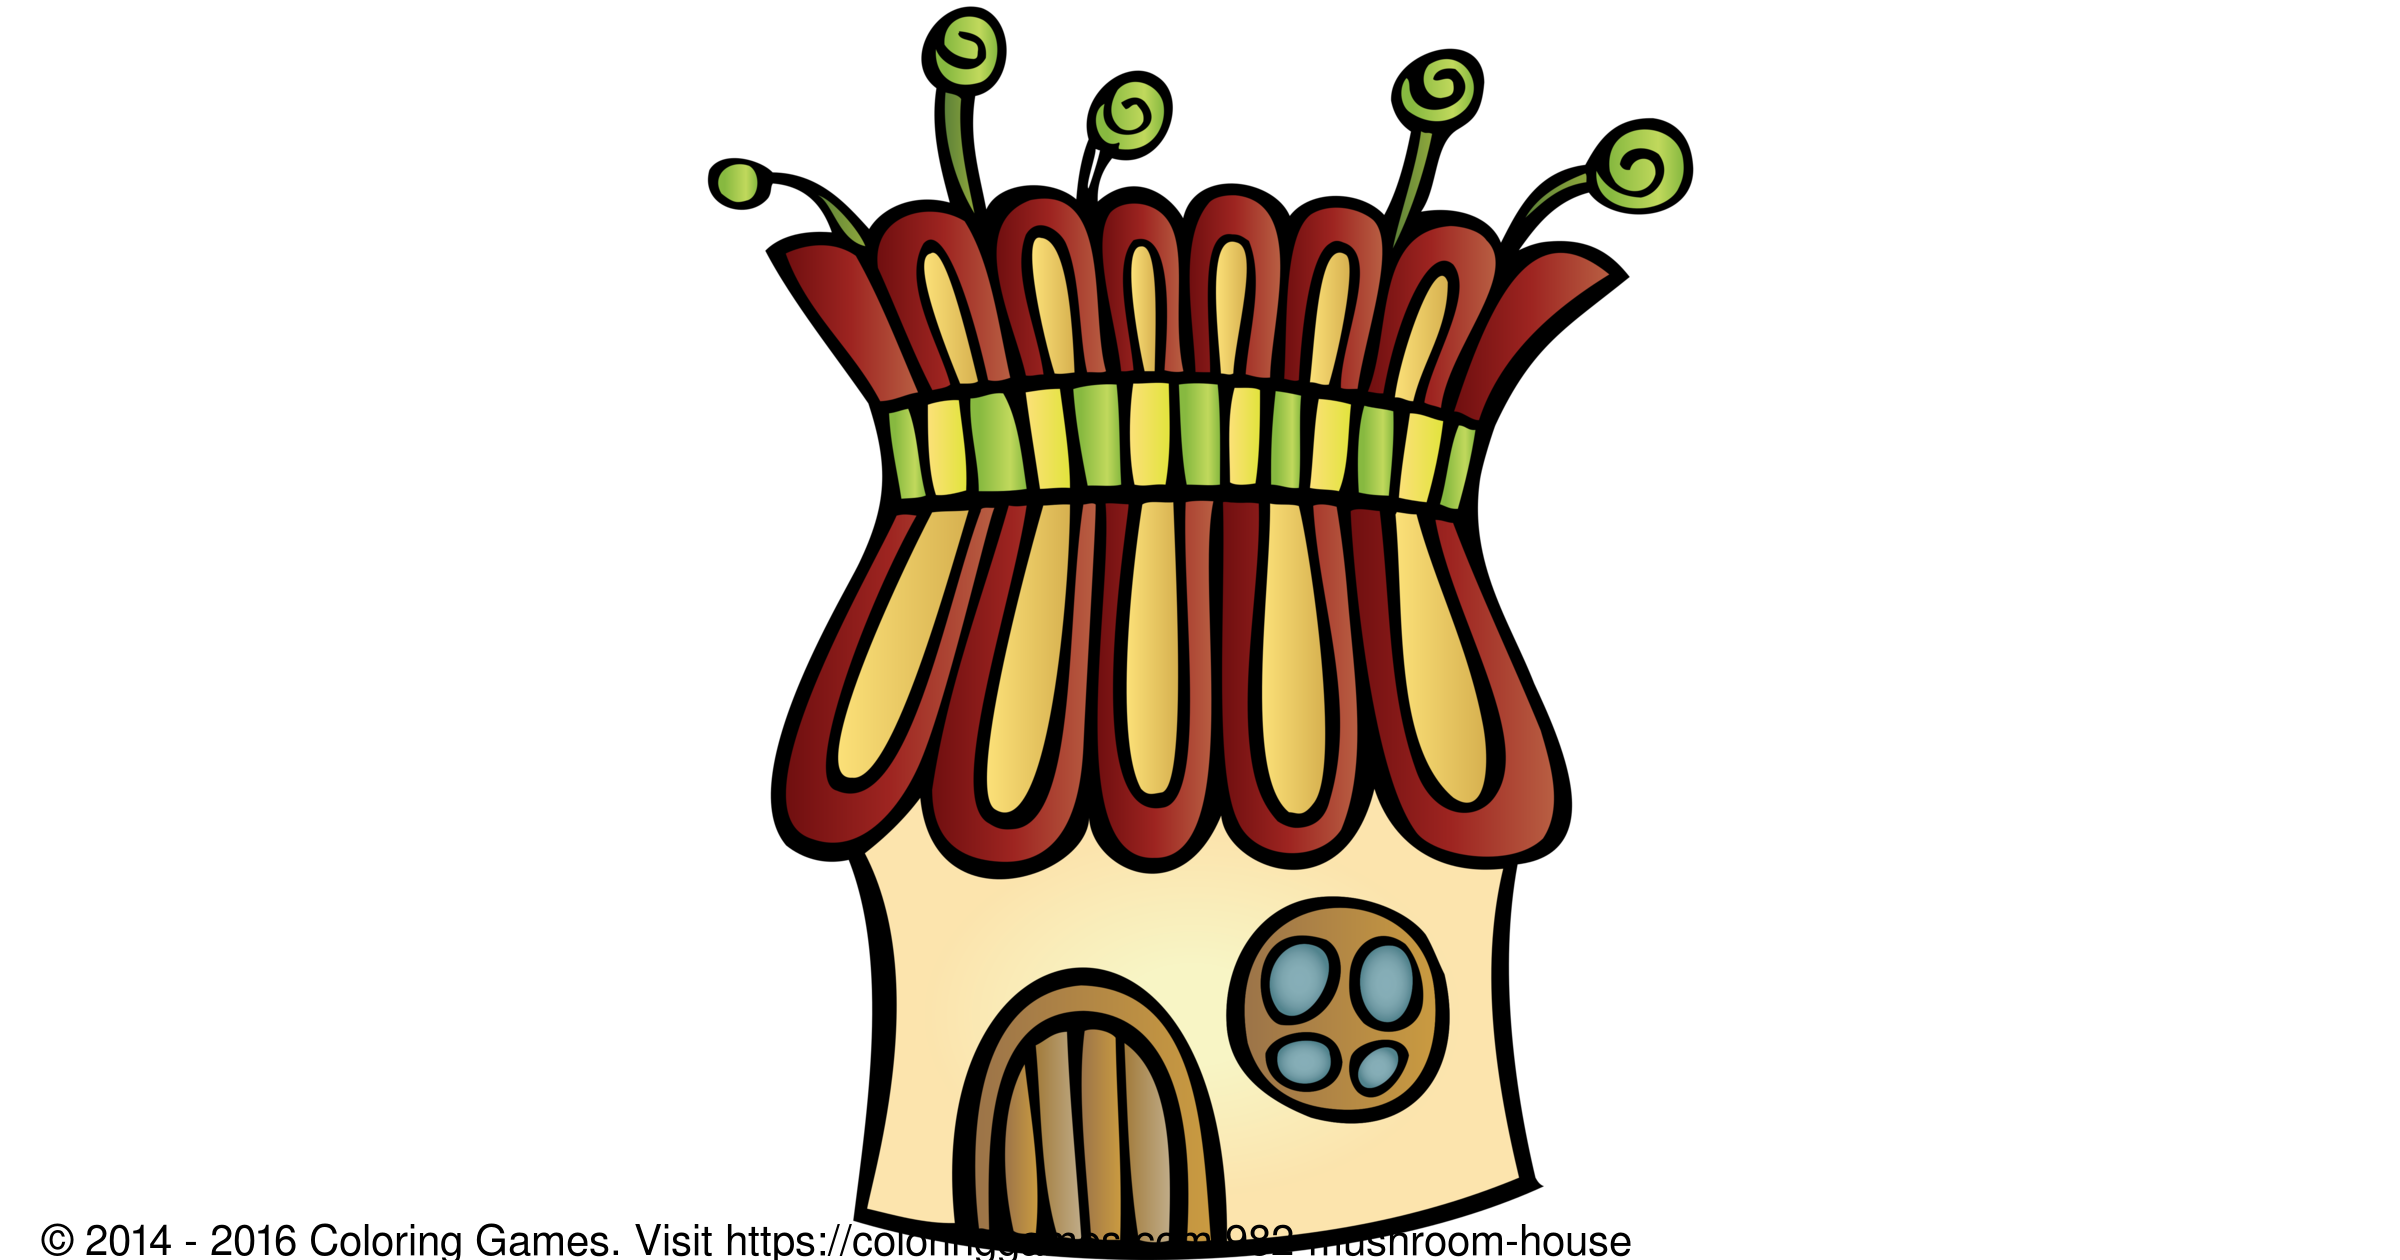 Mushroom house - Coloring Games and Coloring Pages